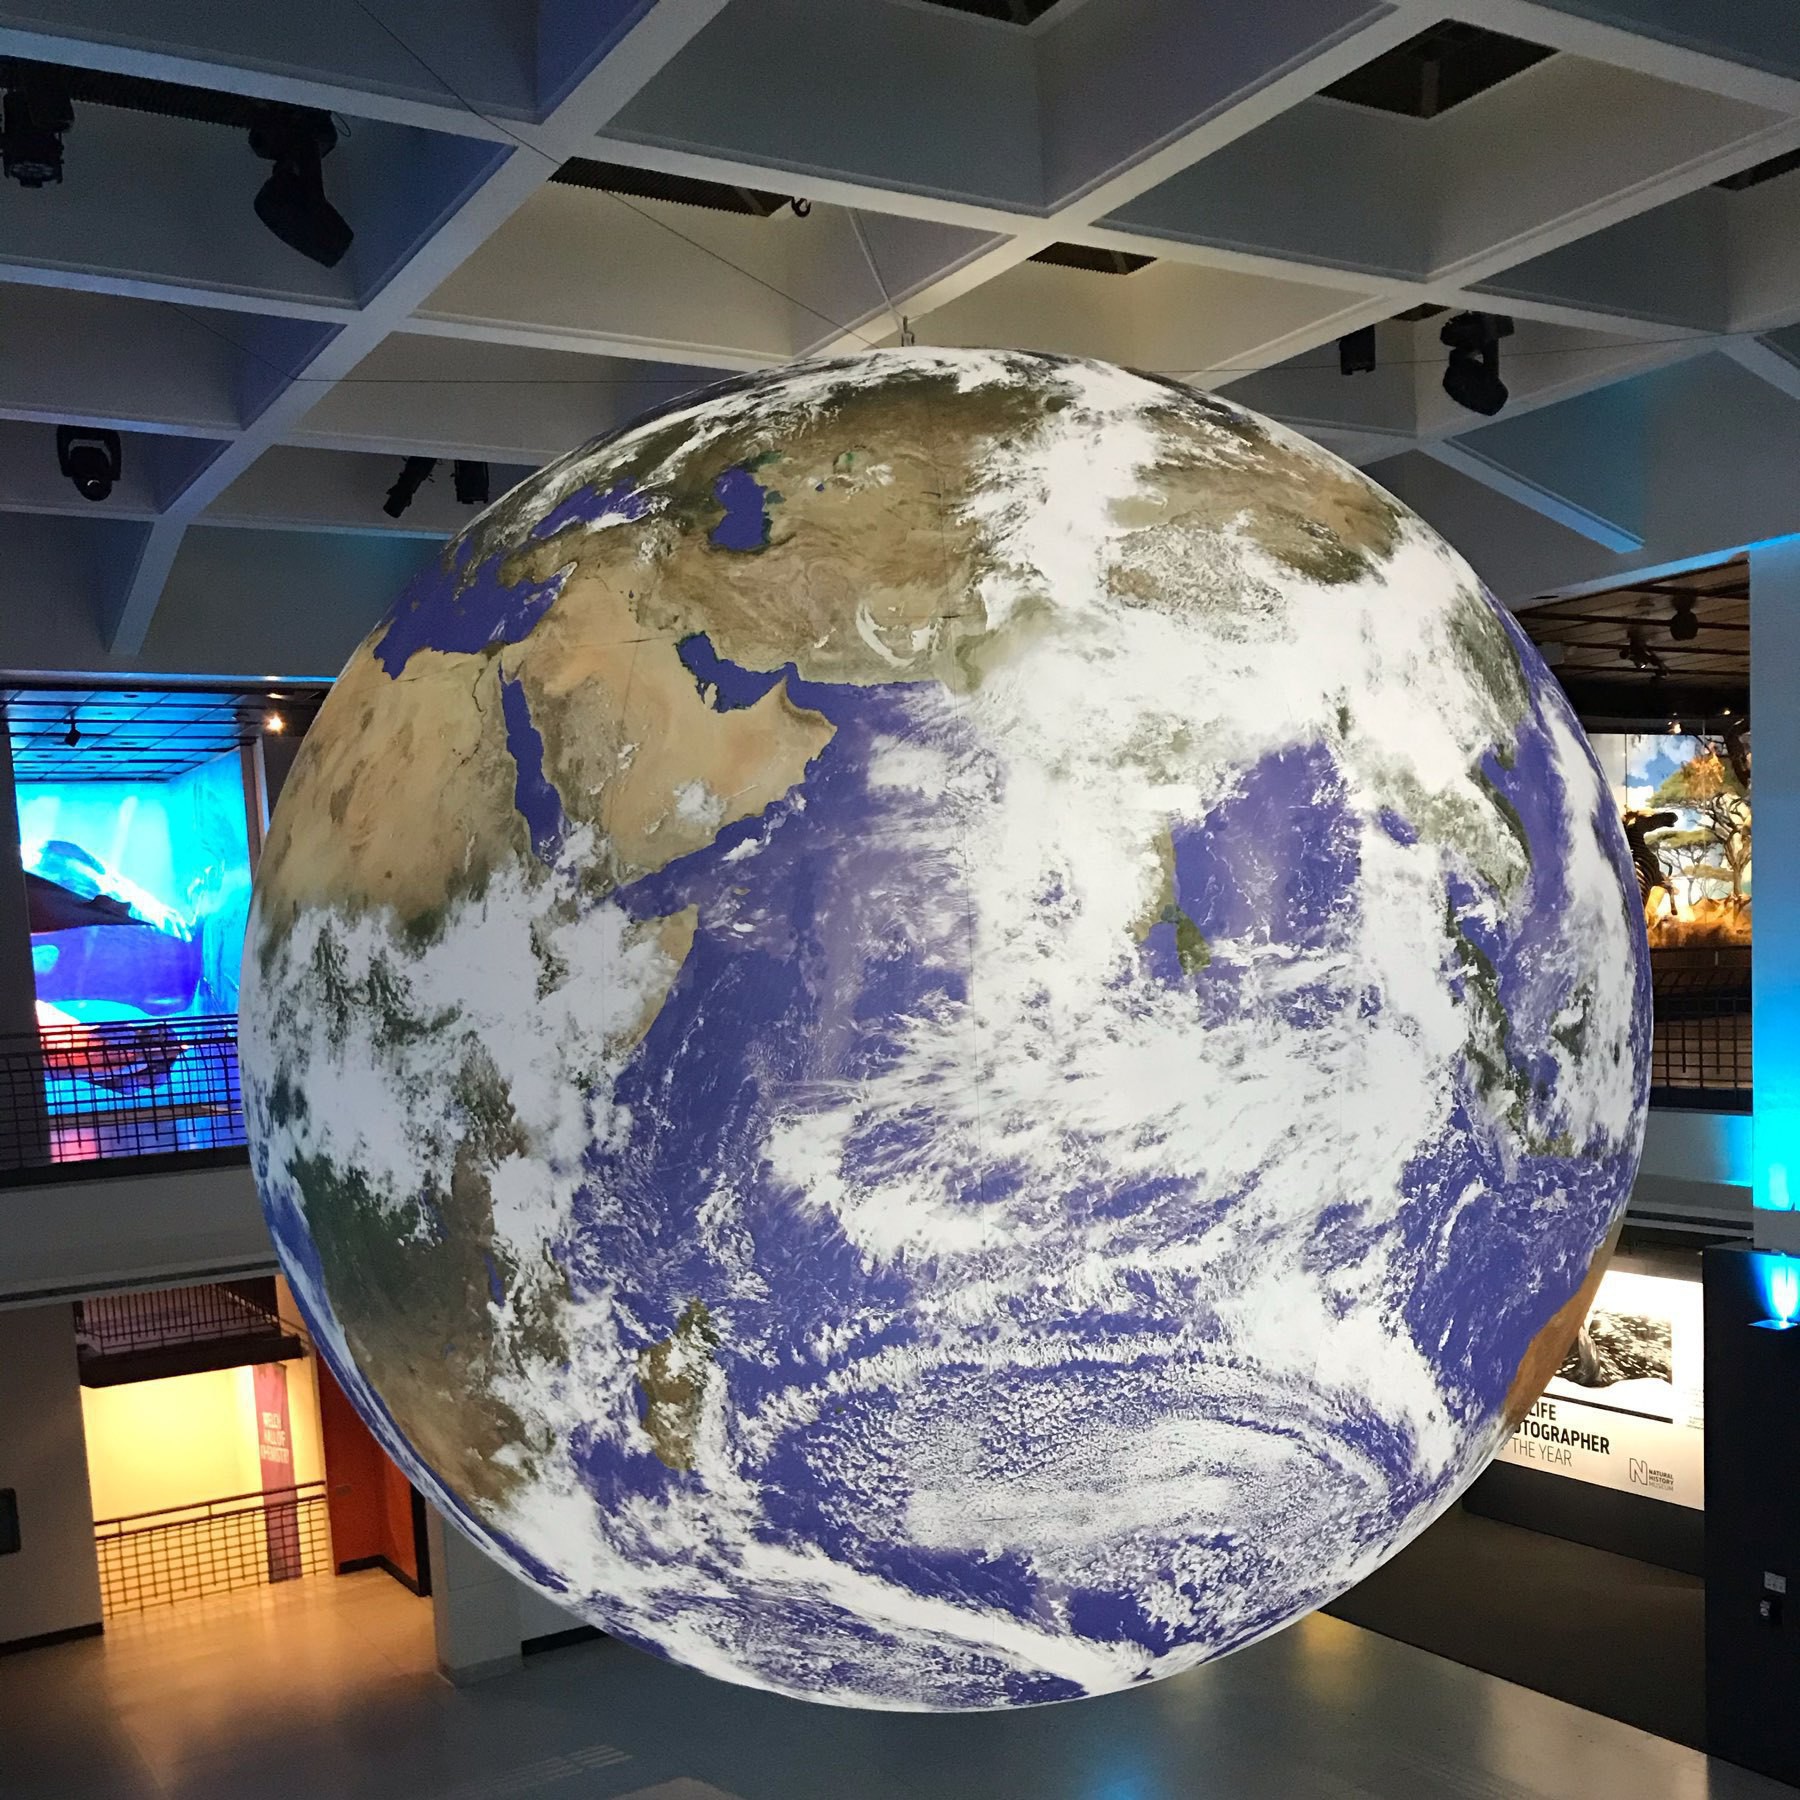 image of a large suspended replica of the planet earth